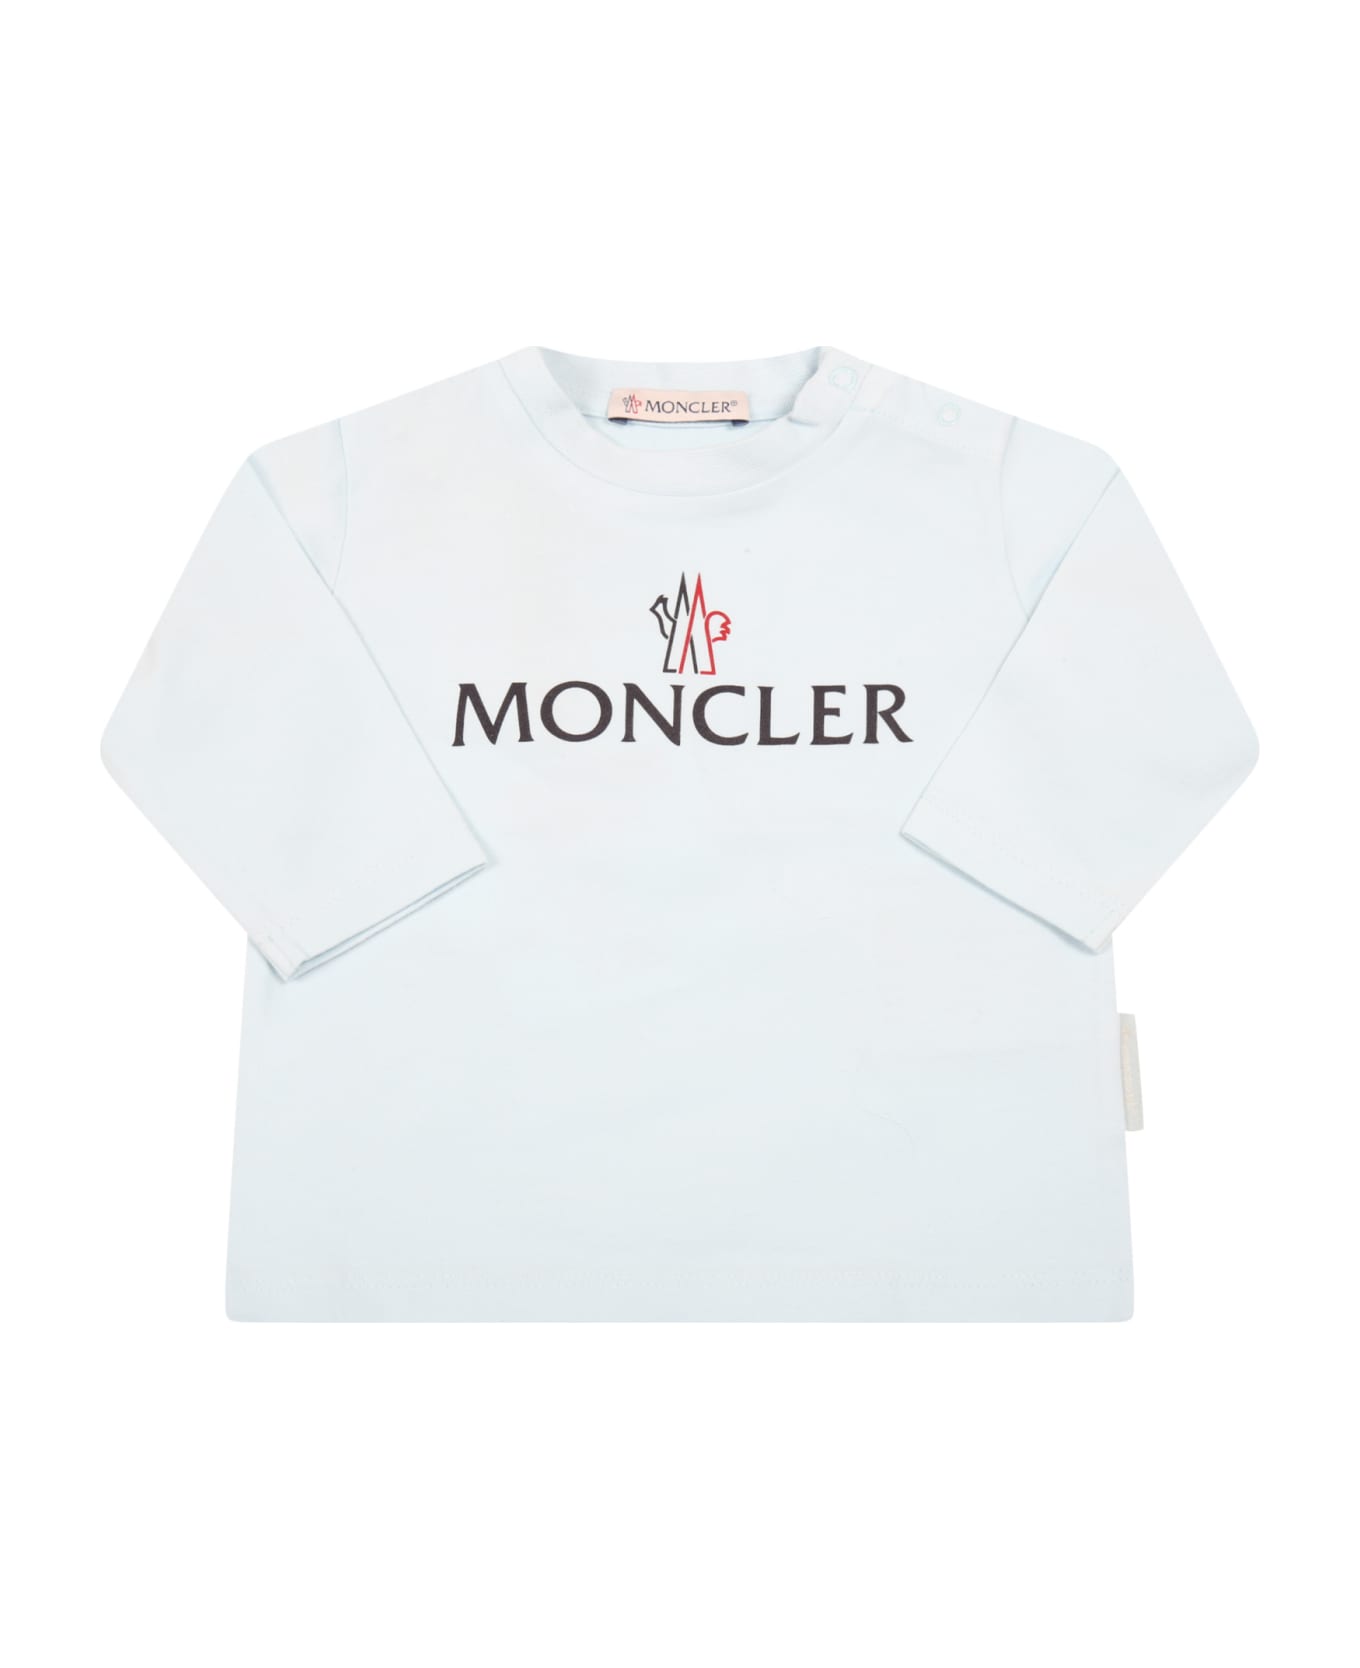 Moncler Light Blue Set For Baby Boy With Logo - Multicolor